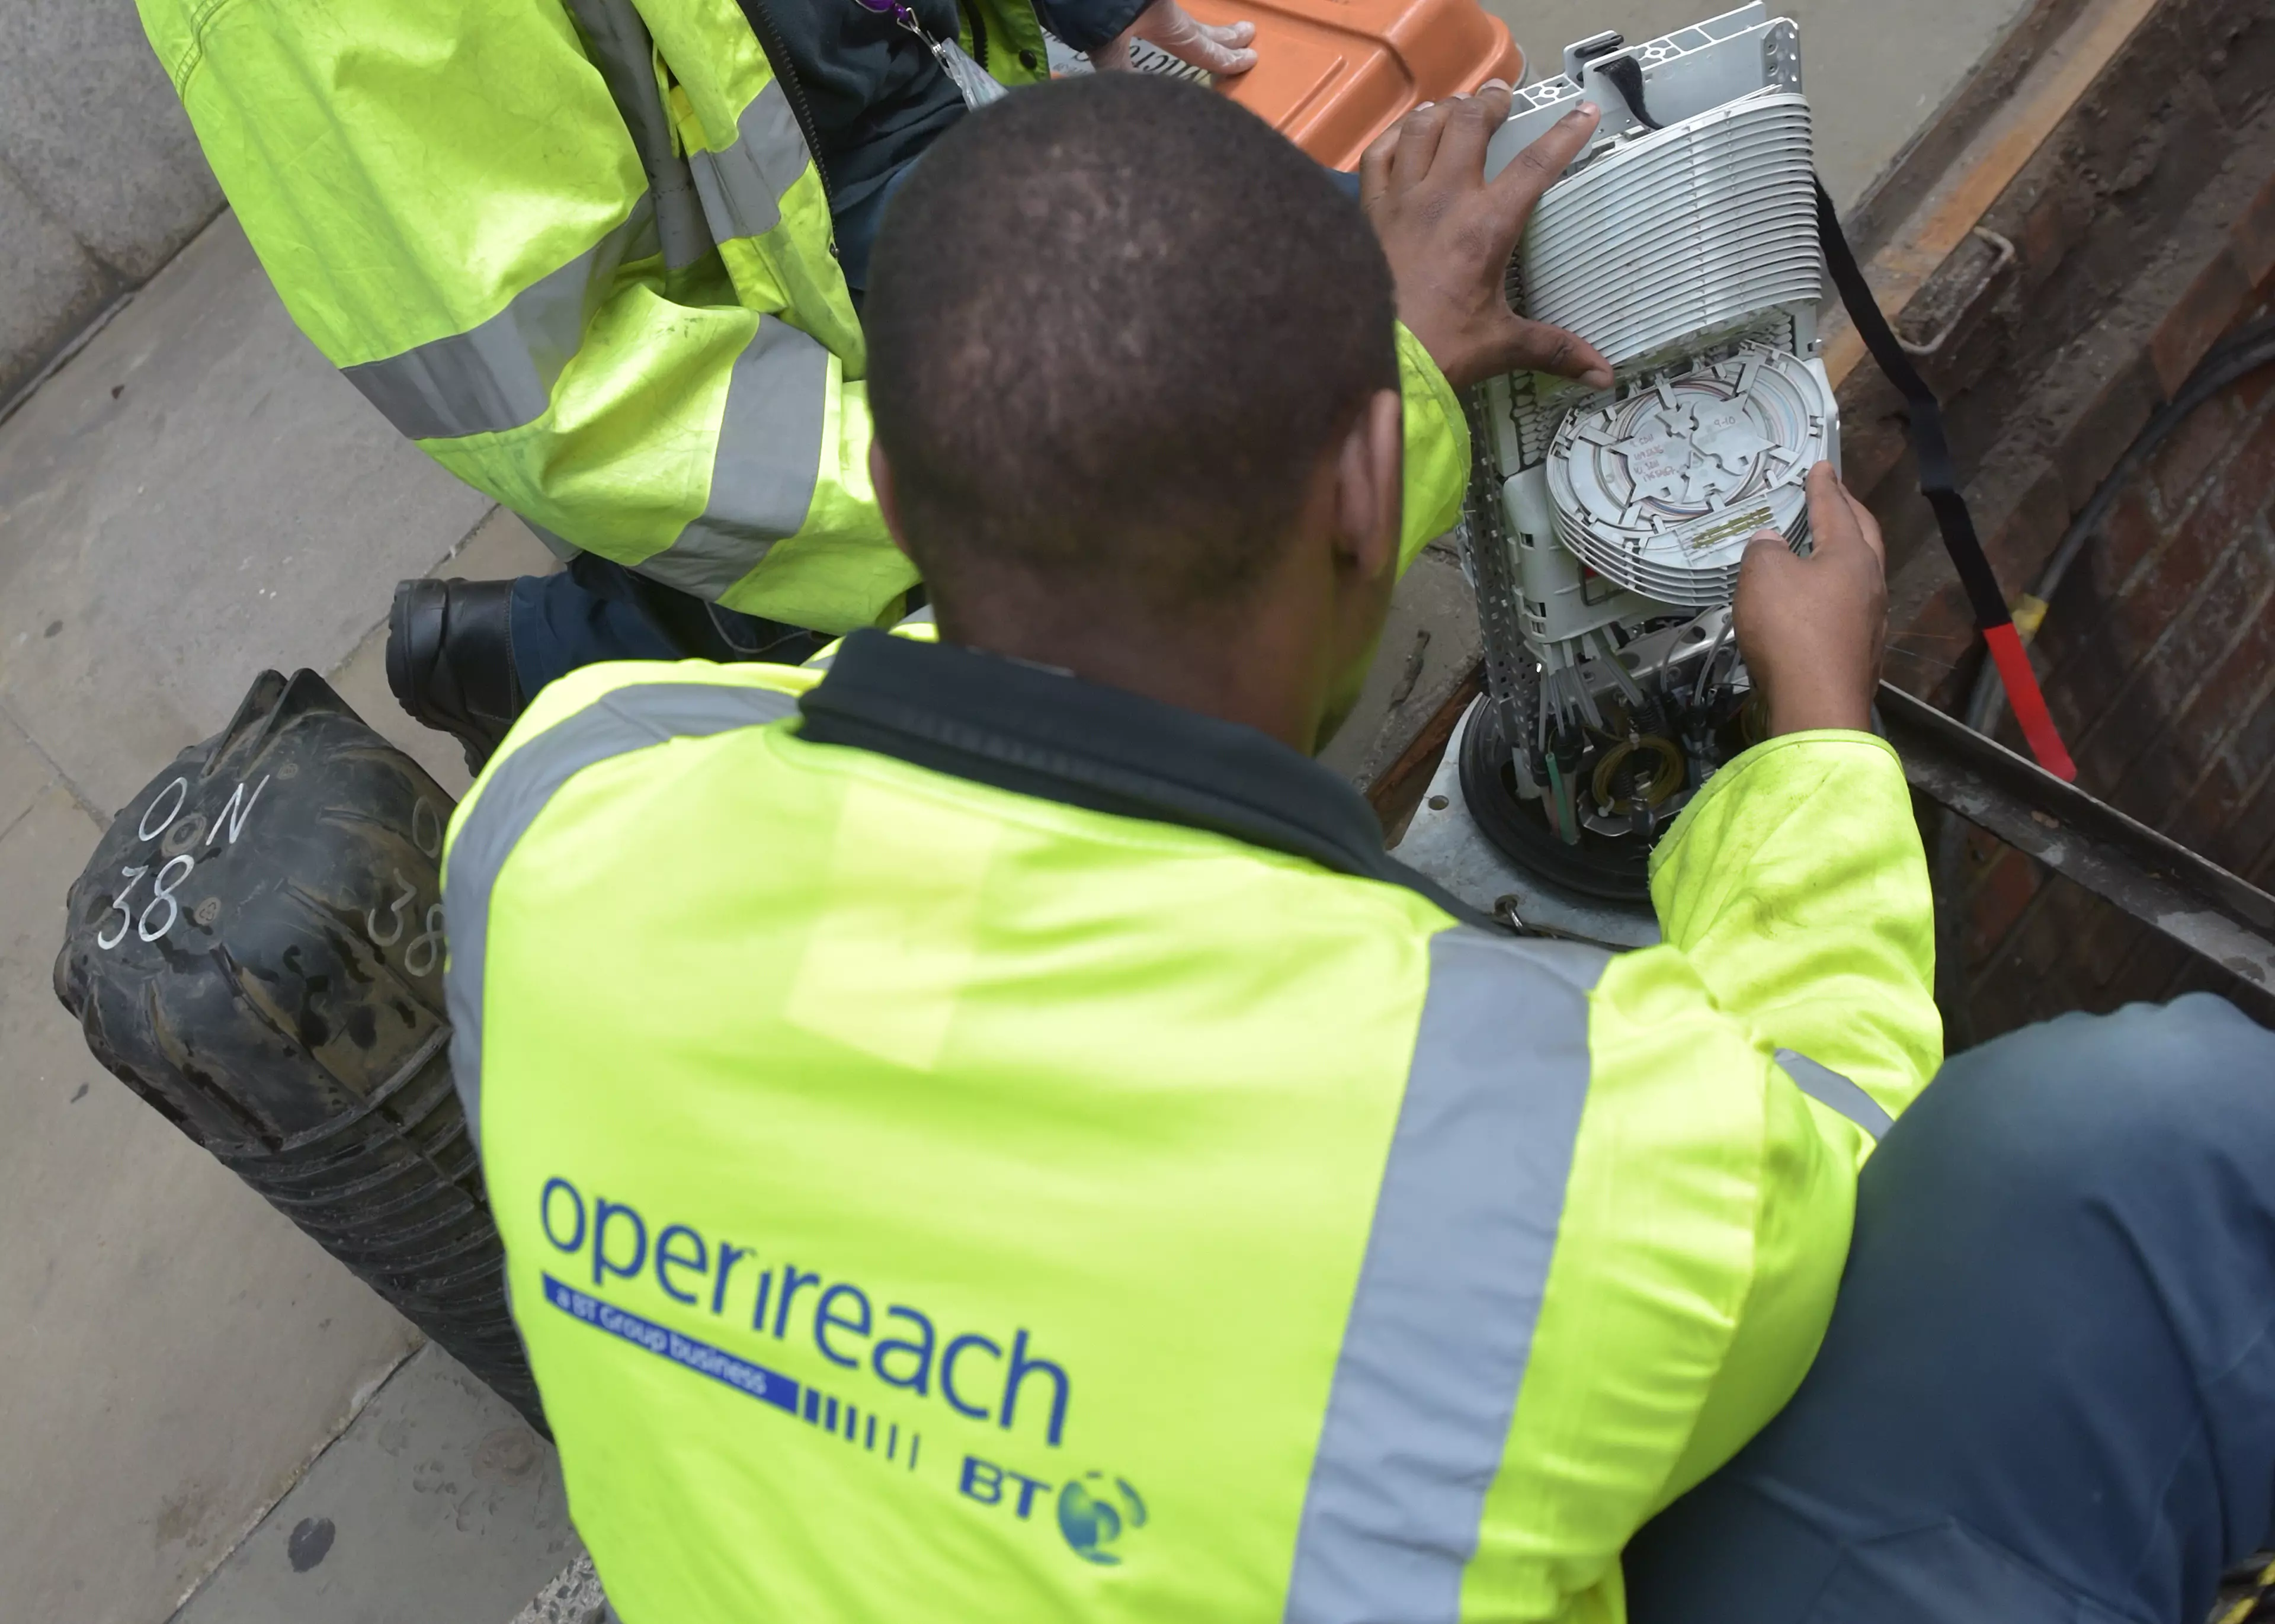 Openreach can't force ISPs to pass on the savings.